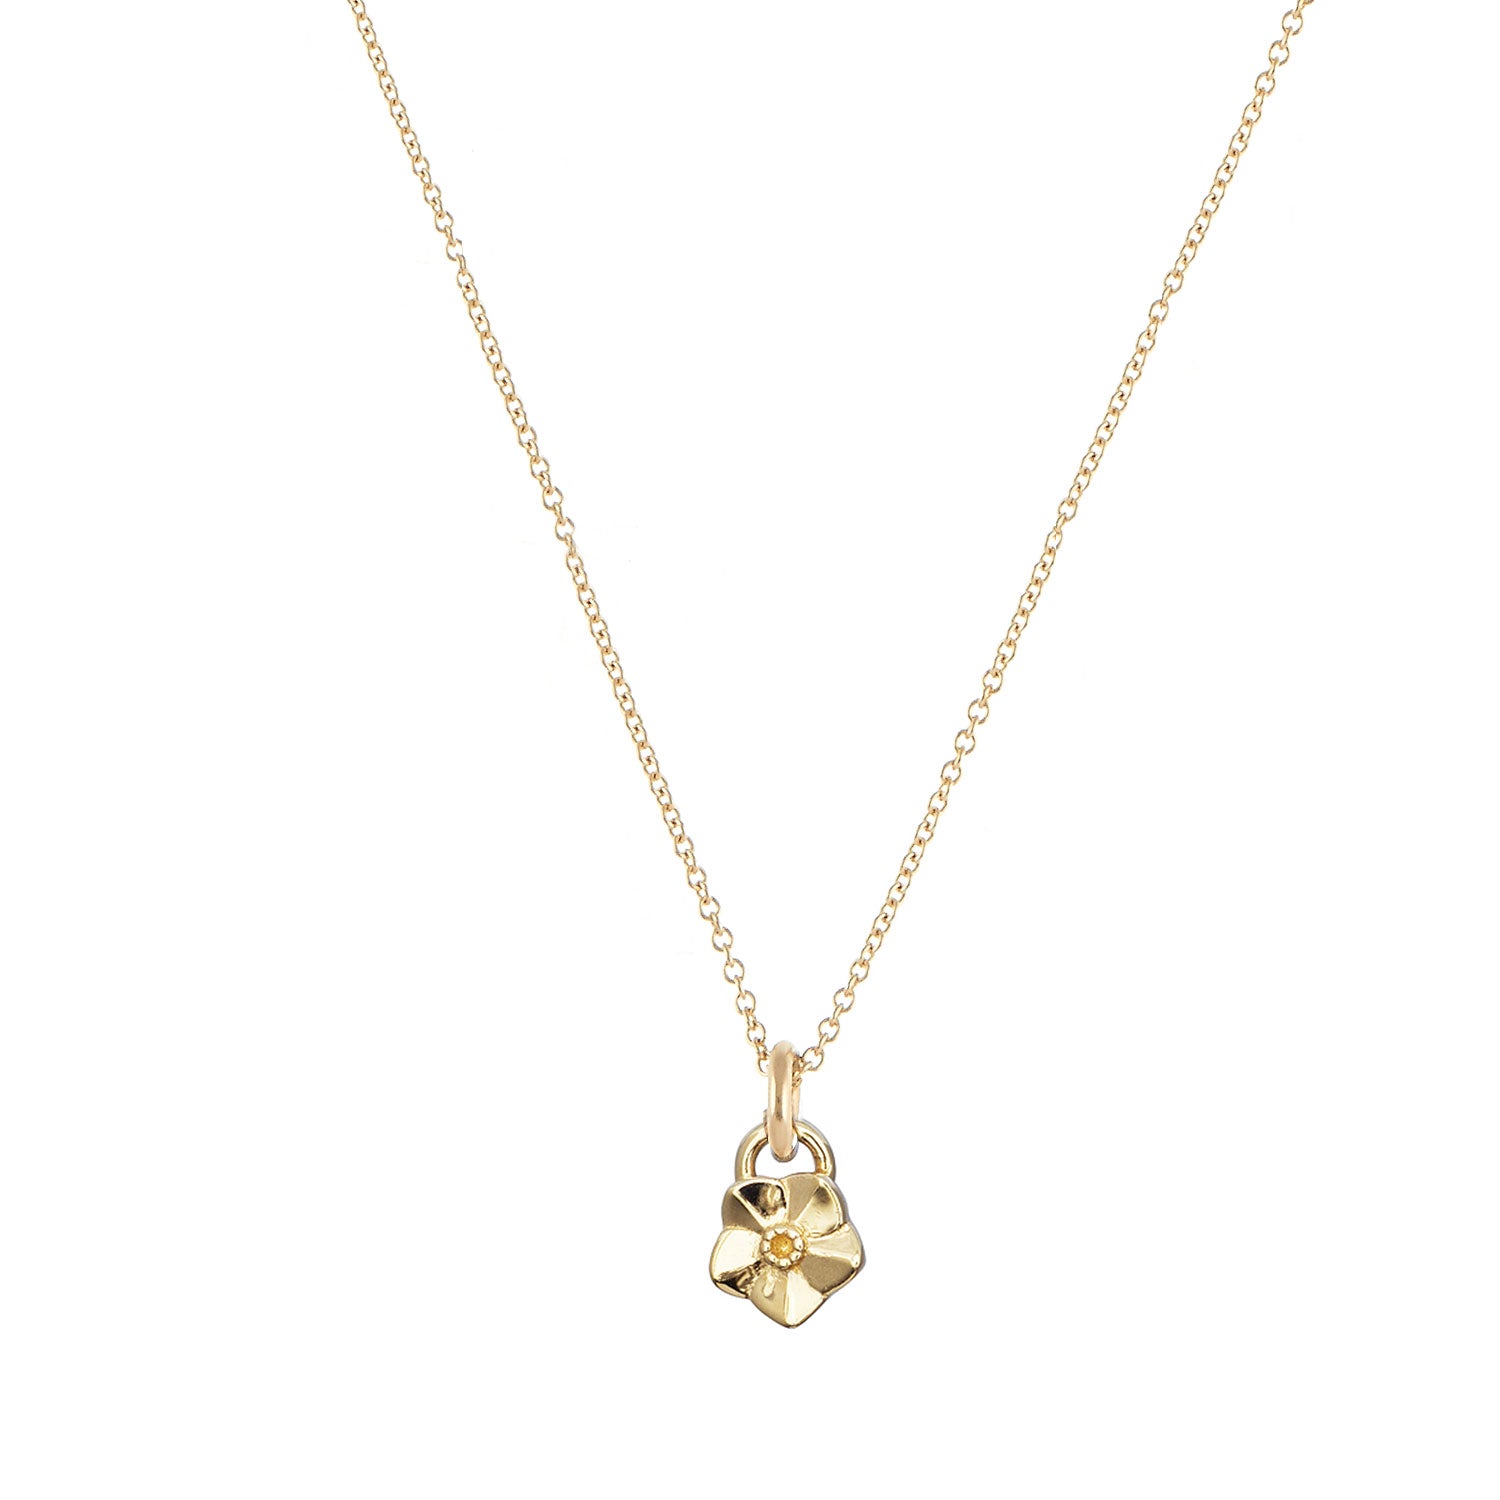 Solid gold forget me not necklace scarlett jewellery